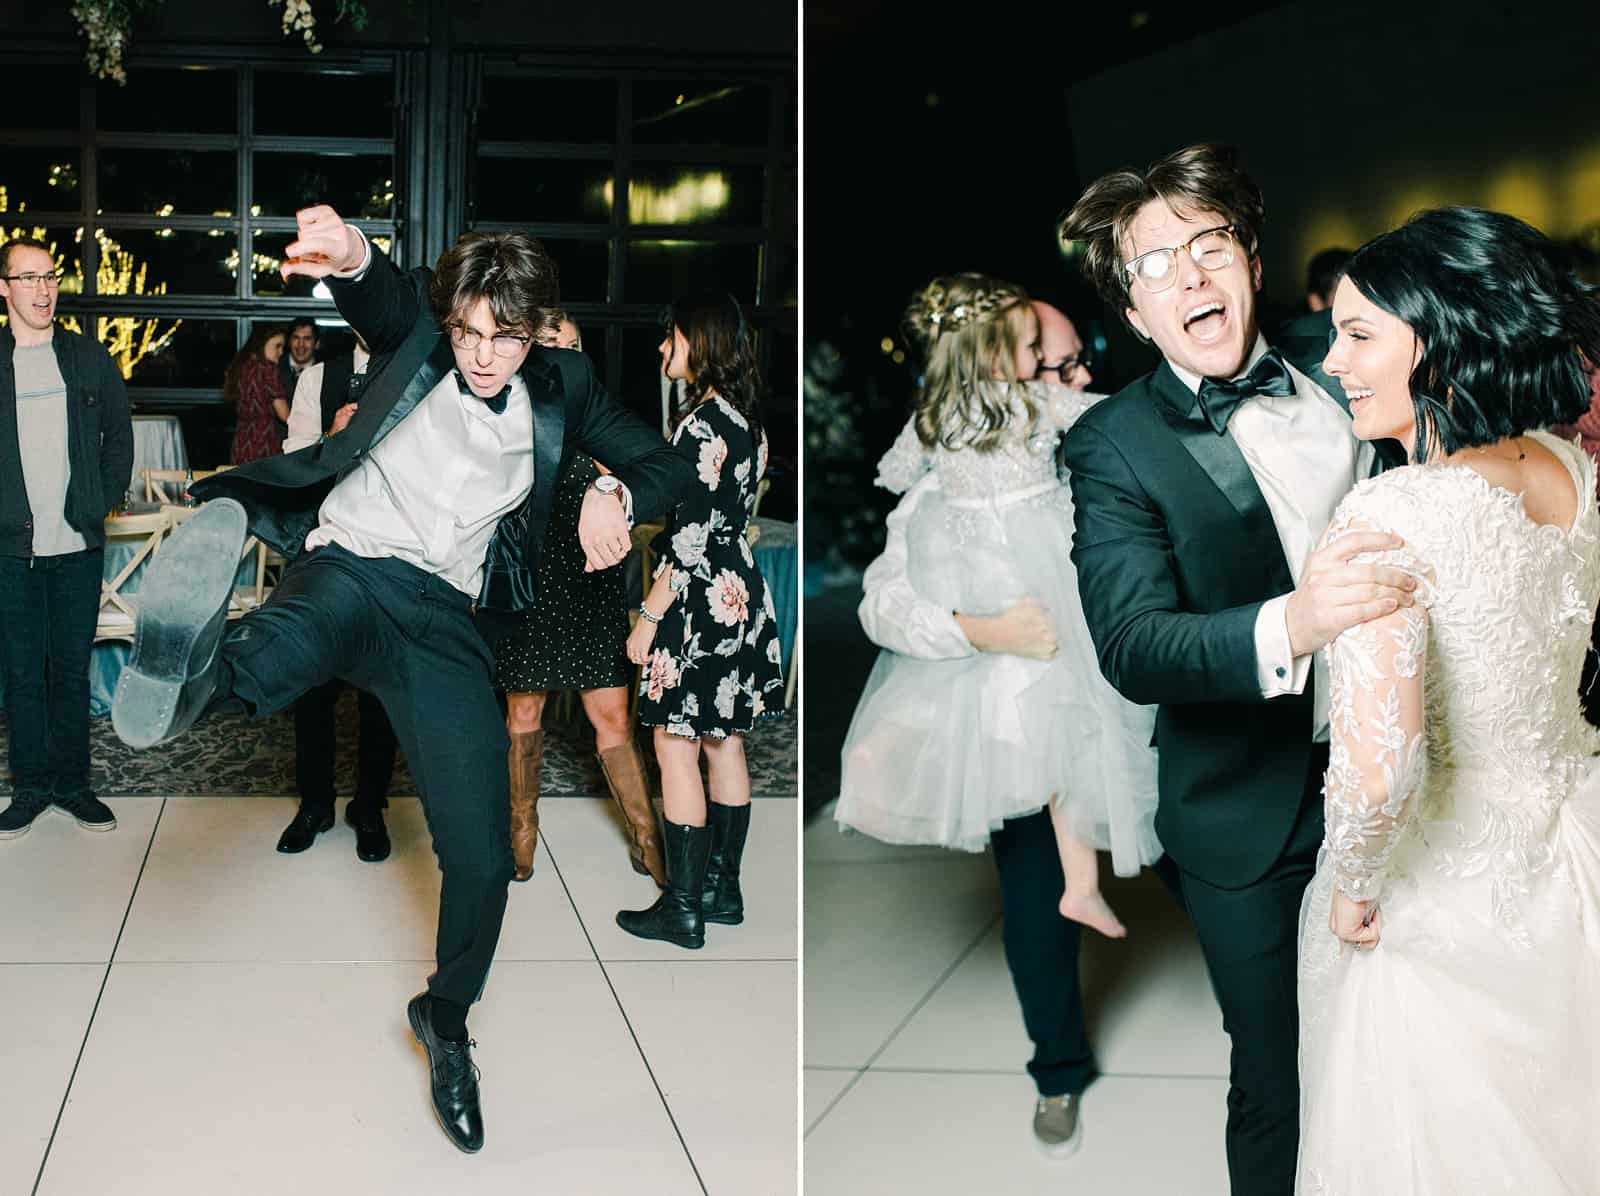 Groom dance moves at wedding reception